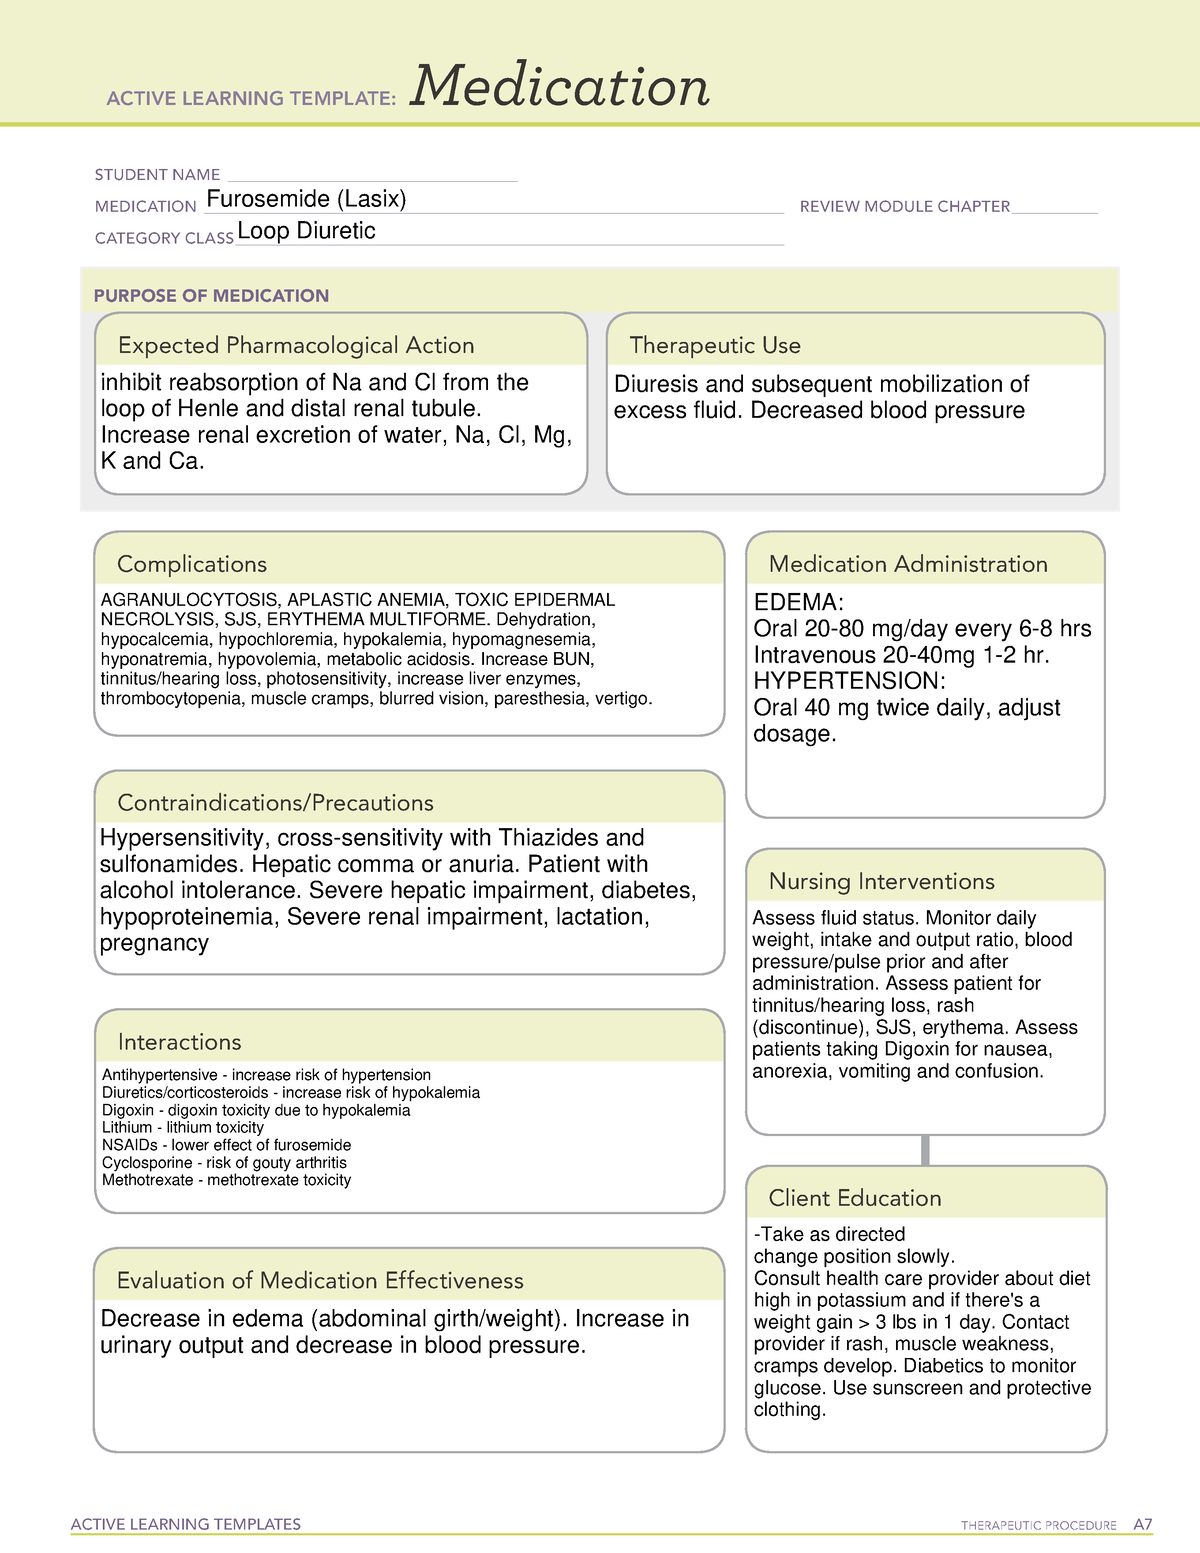 Furosemide medication template ACTIVE LEARNING TEMPLATES THERAPEUTIC